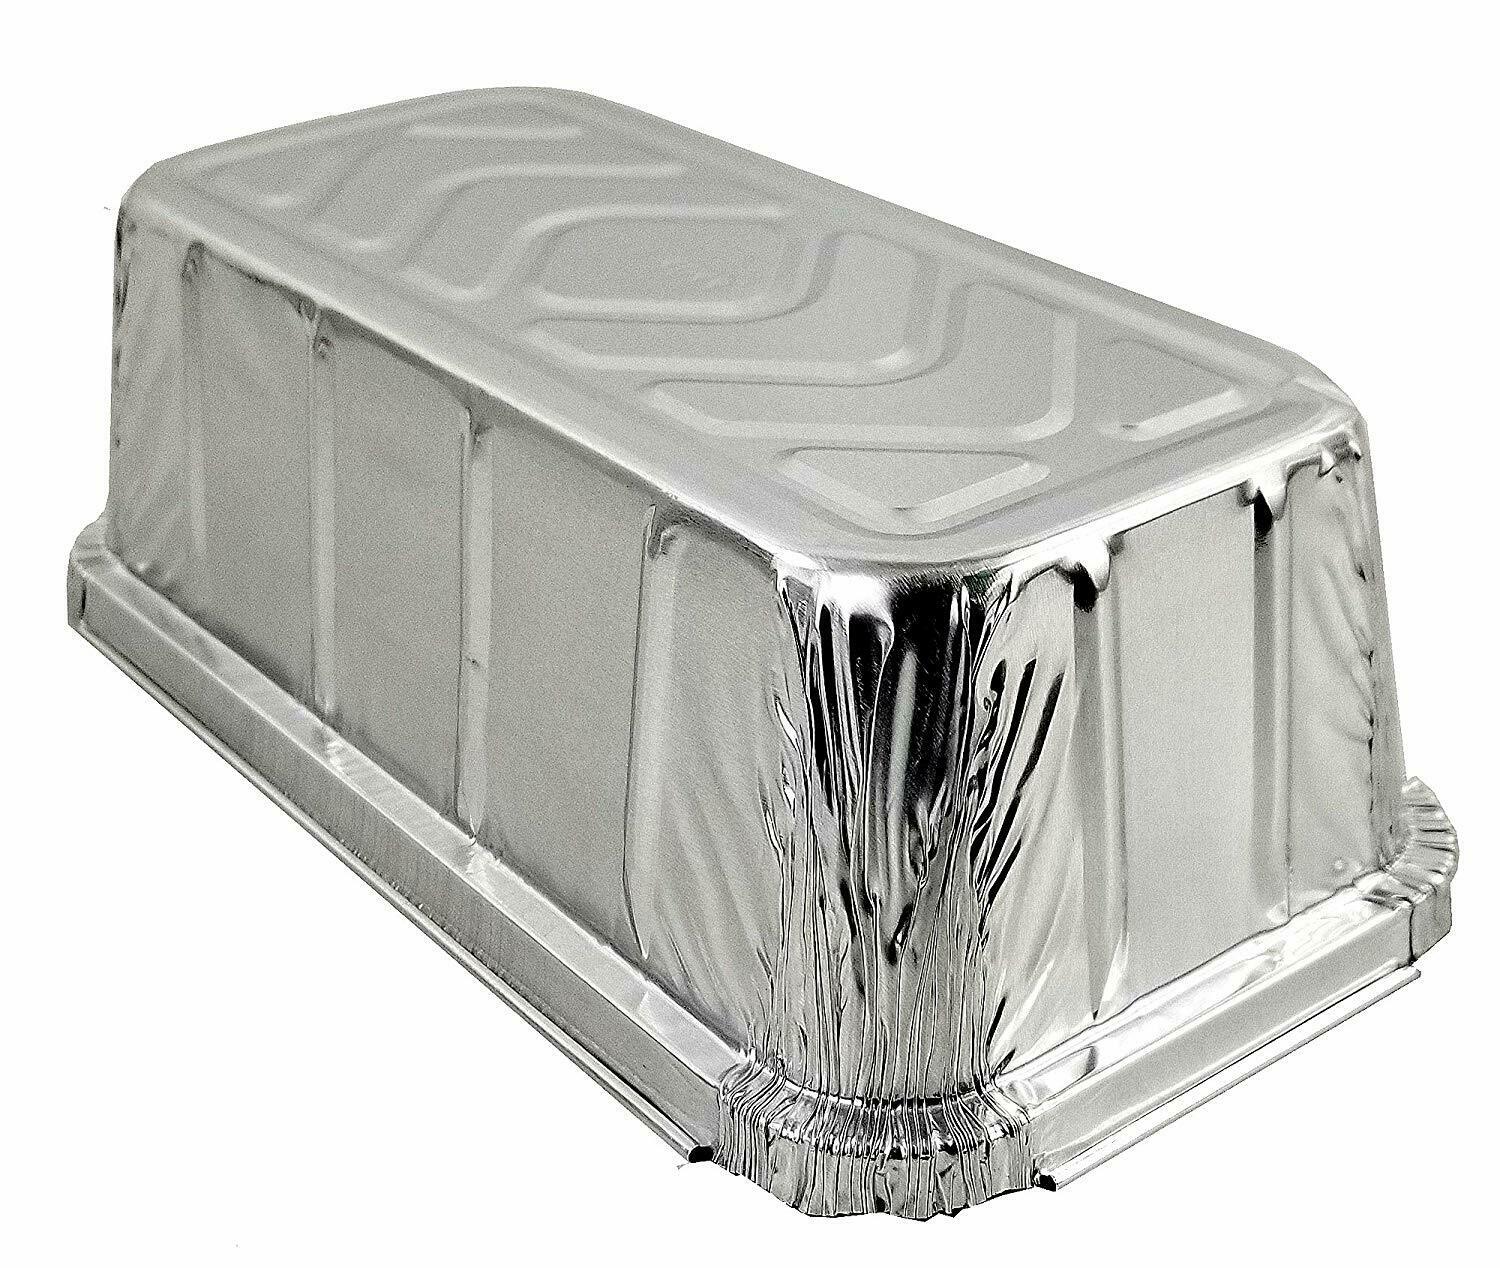 Stock Your Home Small Aluminum Pans Take Out Containers (50 Pack) 50 Foil Oblong Pans and 50 Cardboard Lids - 1 lb Tin Pans - Disposable Food Storage